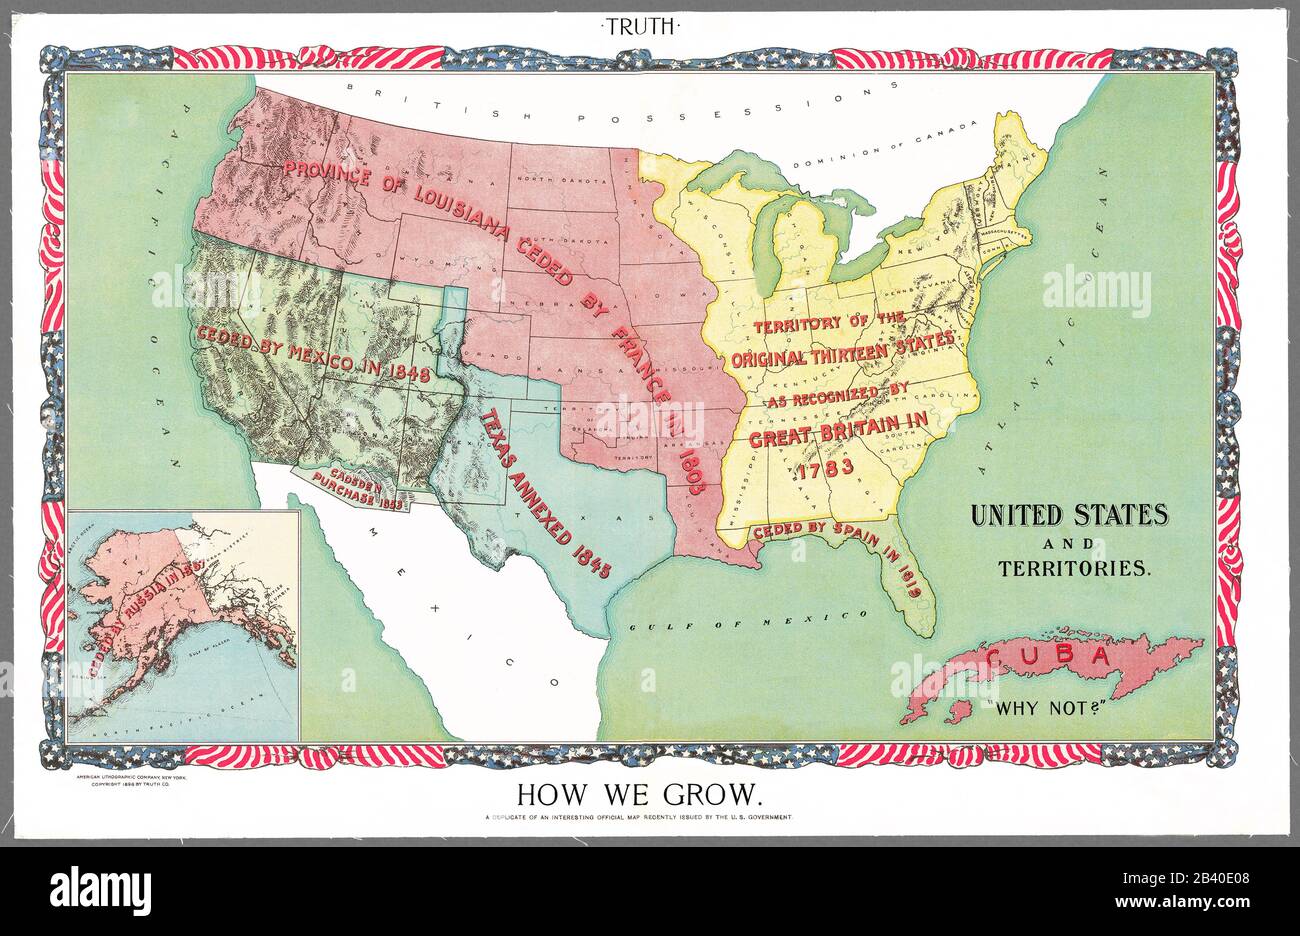 United States and territories: How We Grow, Truth Co. Map, 1898, a restored reproduction. Illustration of how the United States acquired its territory. Note the reference to Cuba around the time of conflict with Spain. Map details land major land annexations up to 1898. Stock Photo